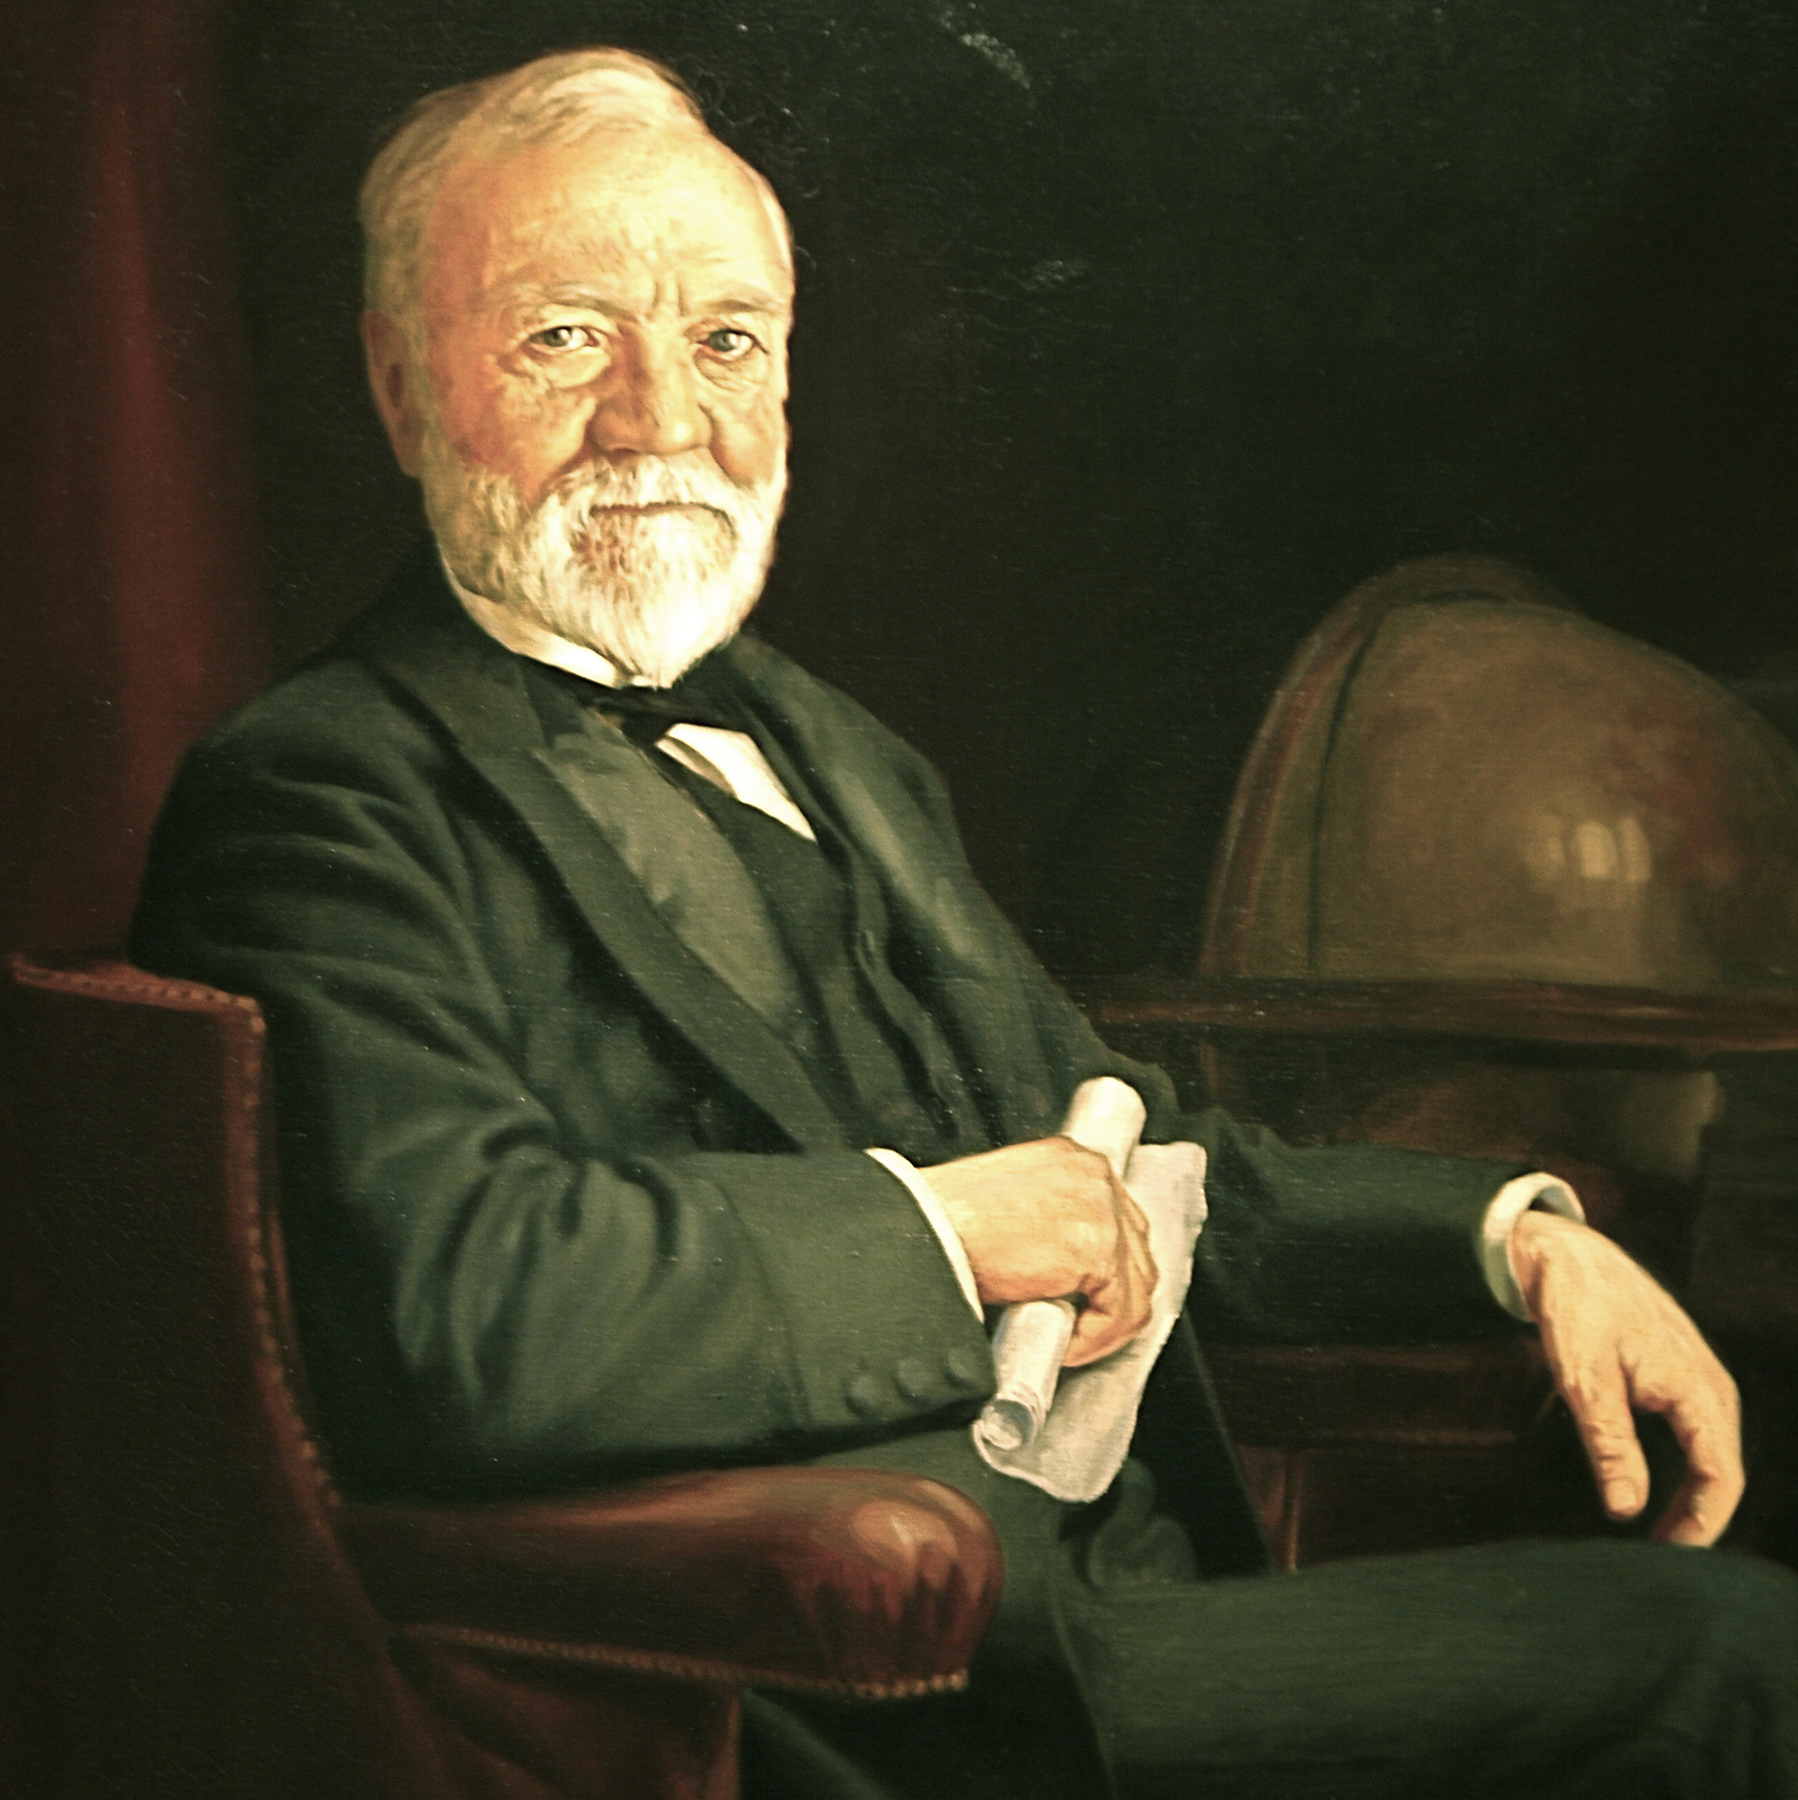 Andrew Carnegie in National Portrait Gallery photo wikipedia